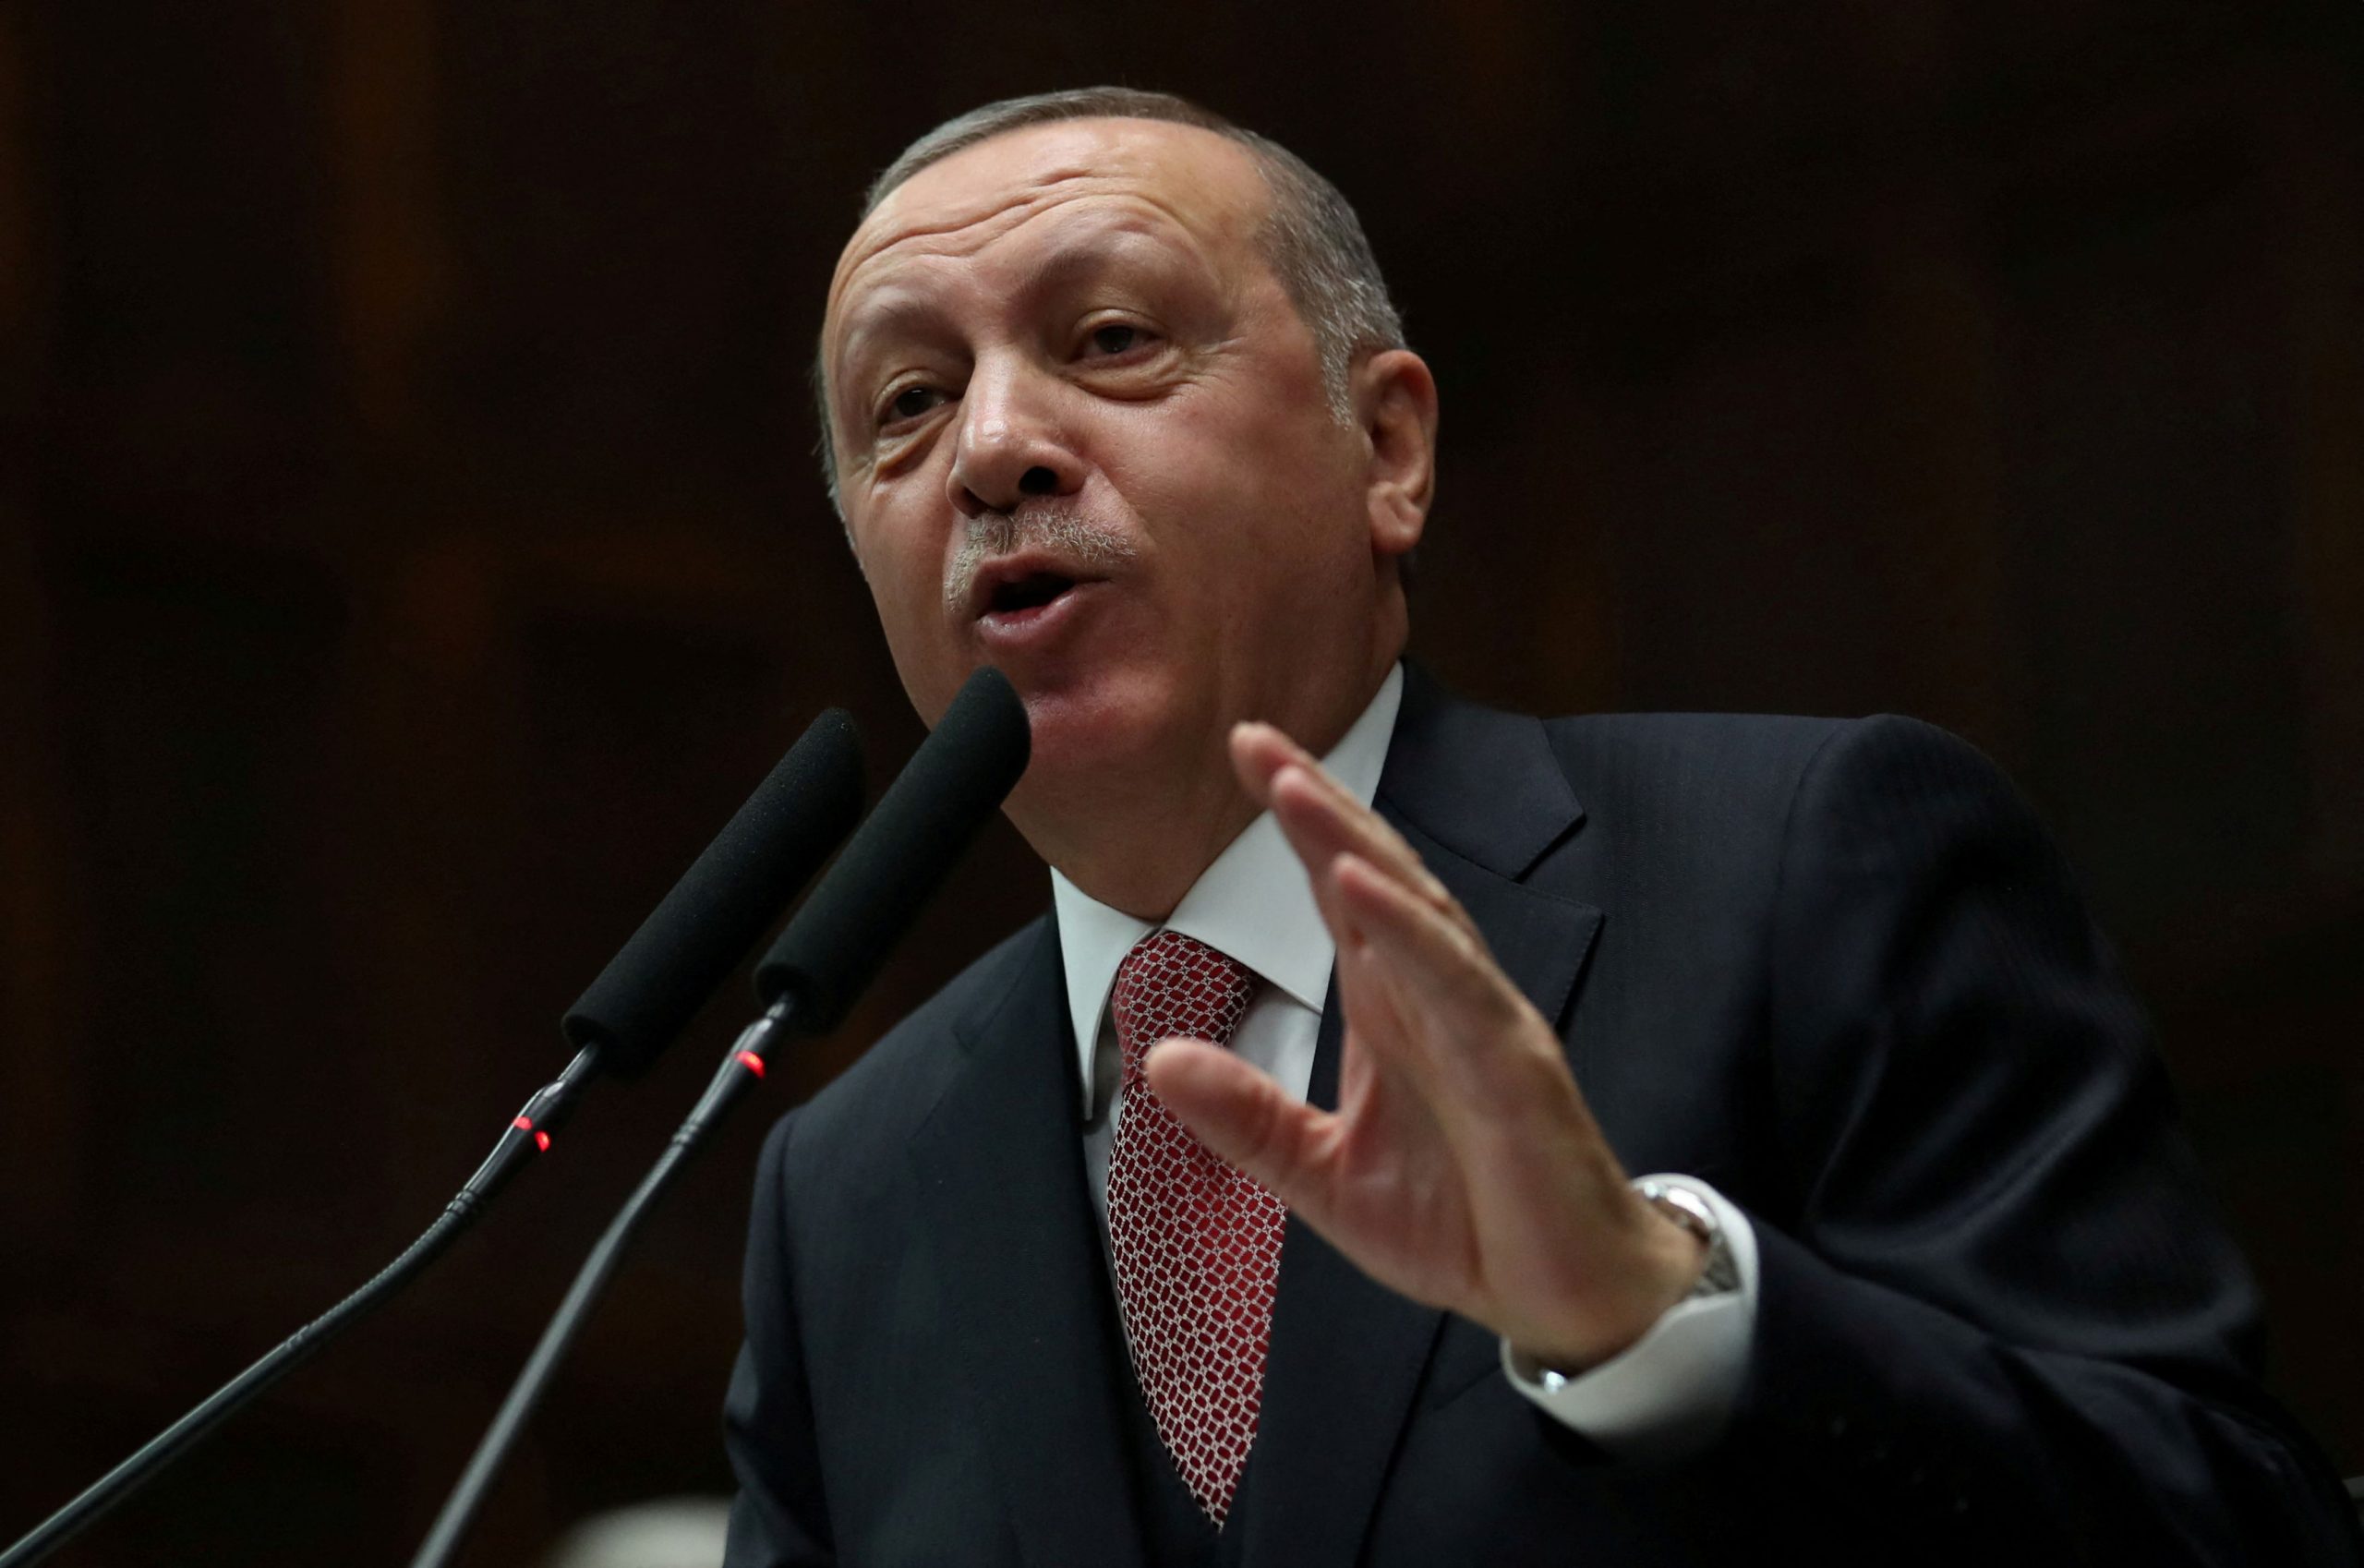 Erdogan on EastMed – Why the US withdrew its support for the pipeline